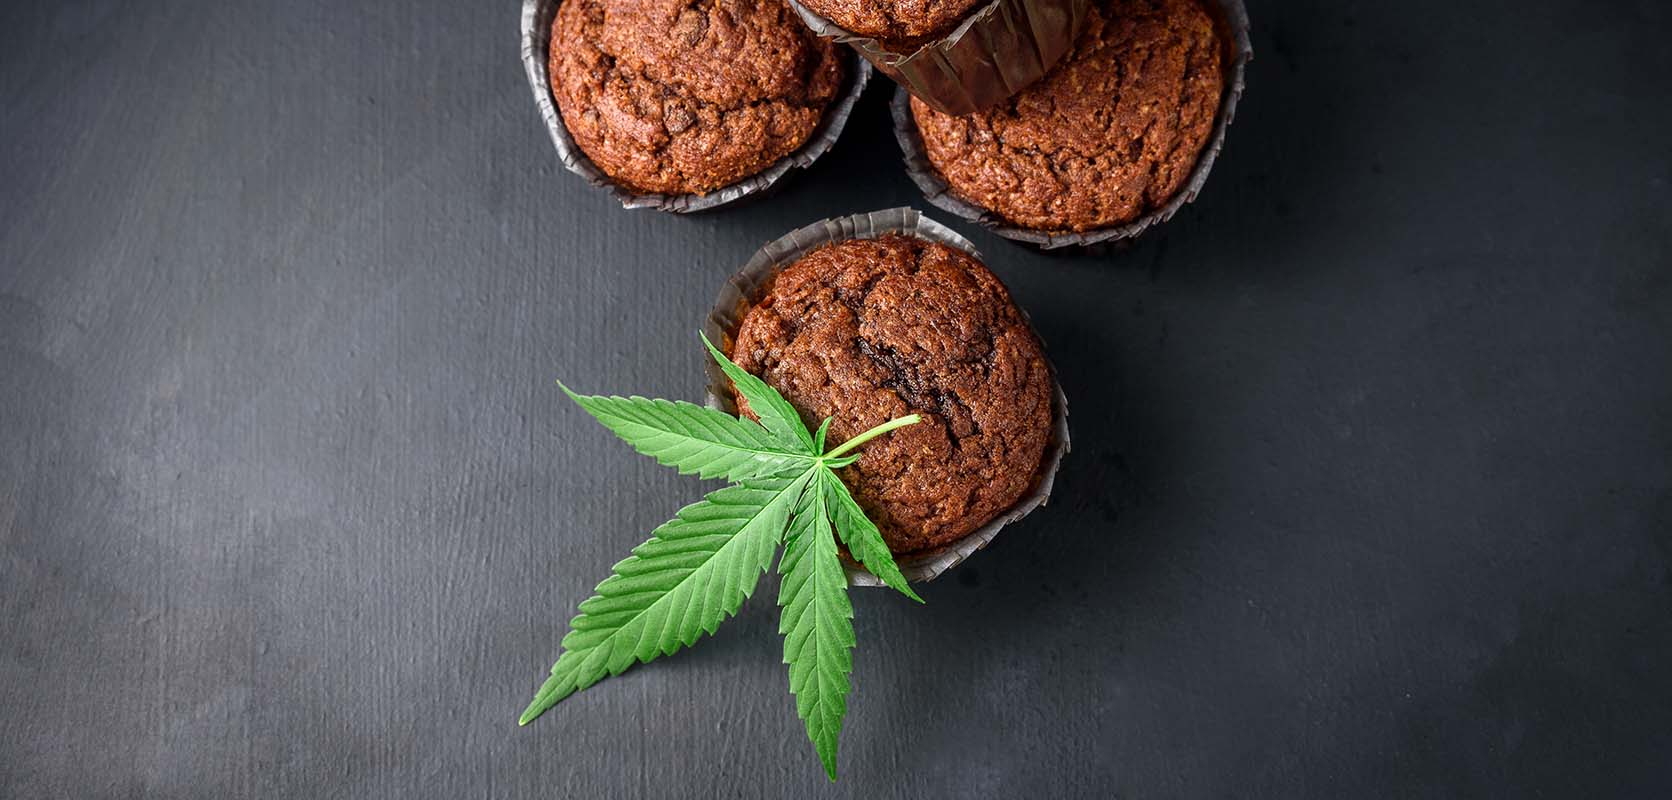 Weed brownies and a cannabis leaf. edibles canada. weed edibles. marijuana edibles canada. weed dispensary for mail order marijuana and cheap canna value buds.